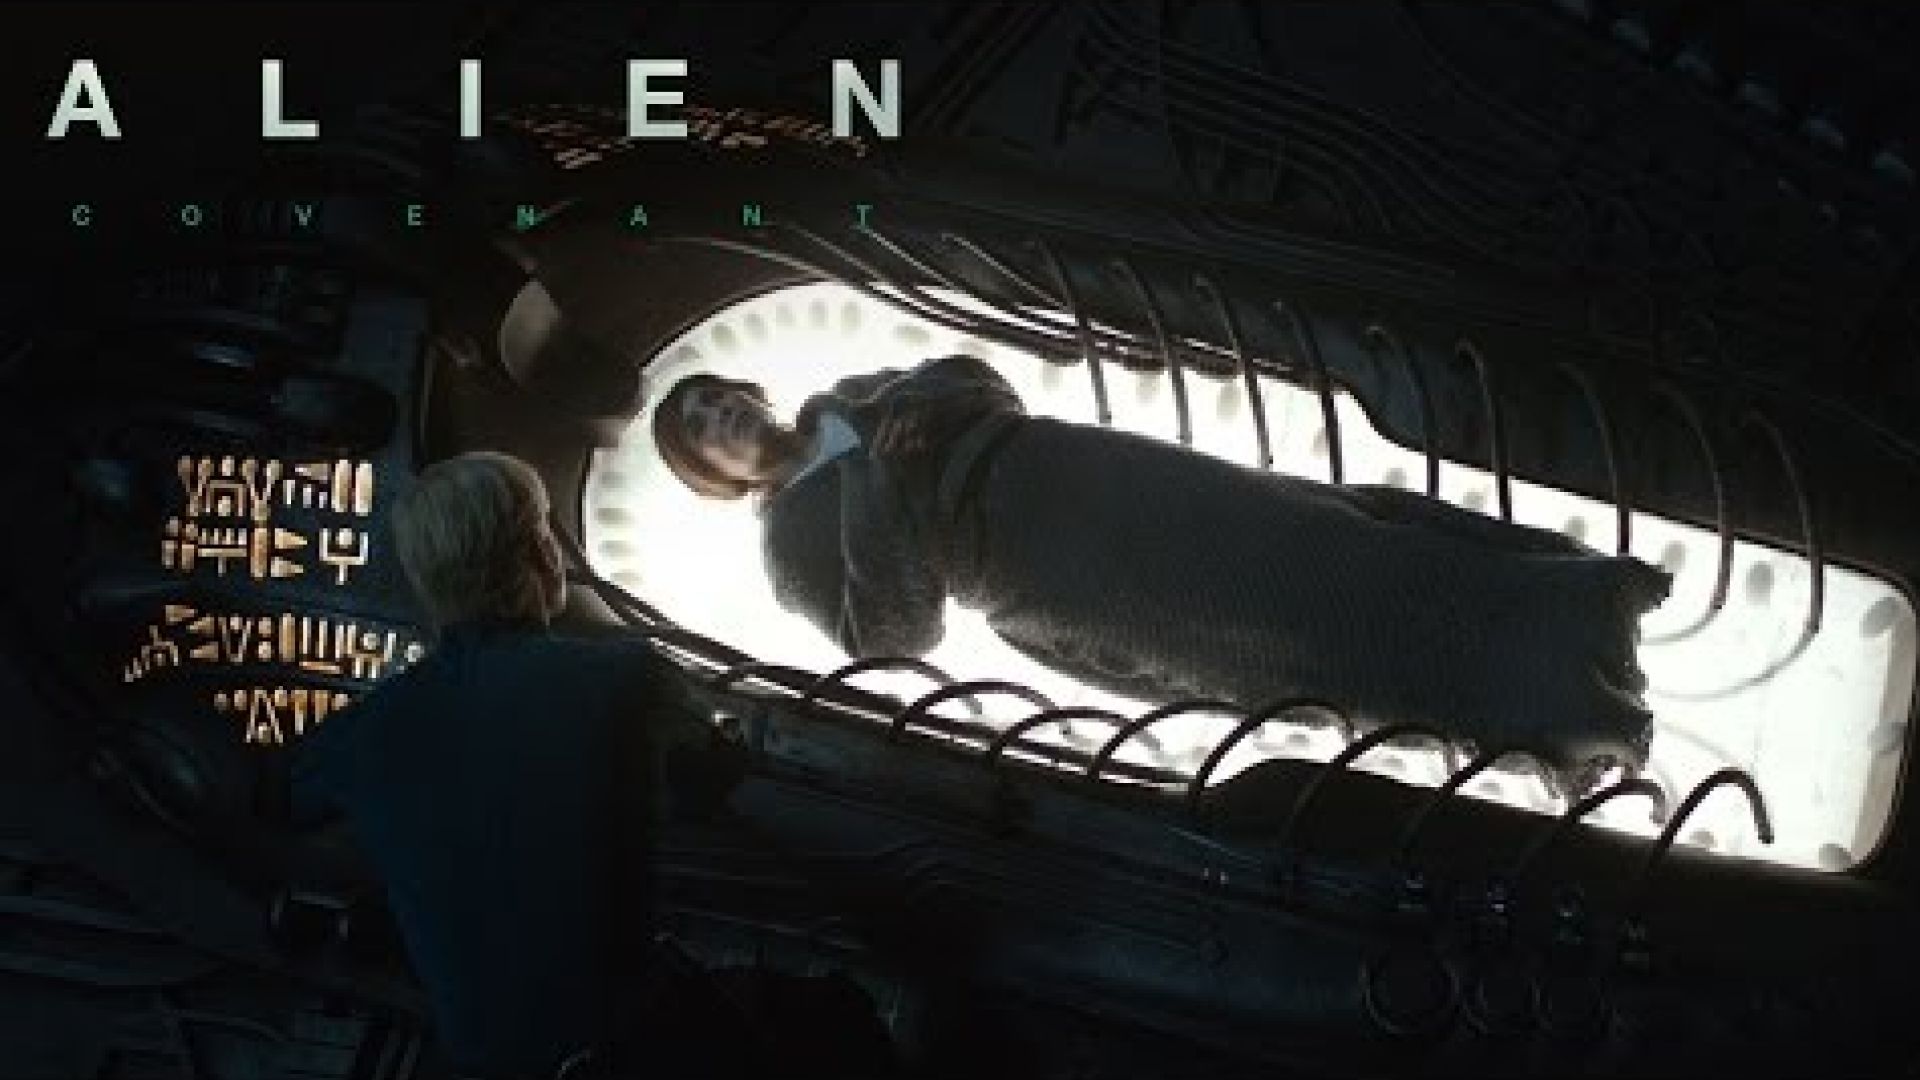 New video from &#039;Alien: Covenant&#039;. What happens to the Promet